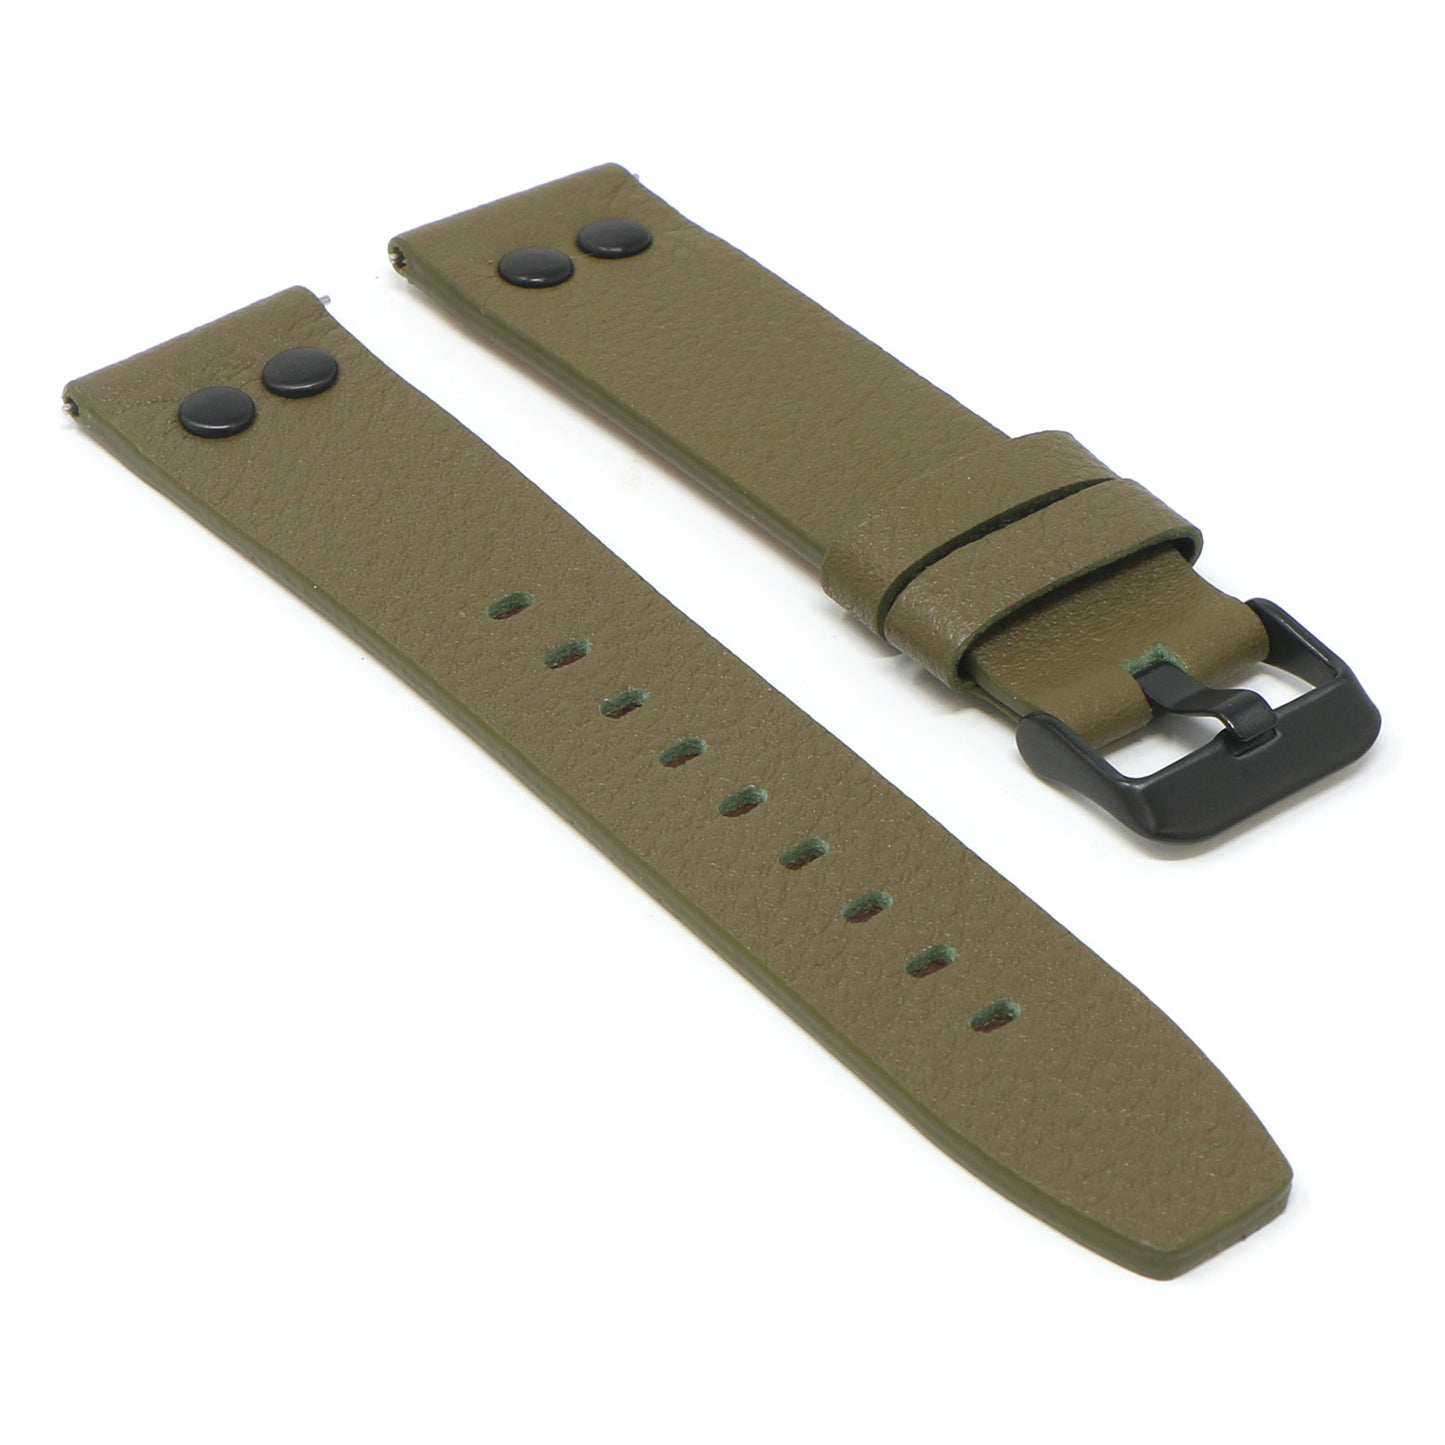 23mm Textured Leather Watch Band Strap w/ Rivets